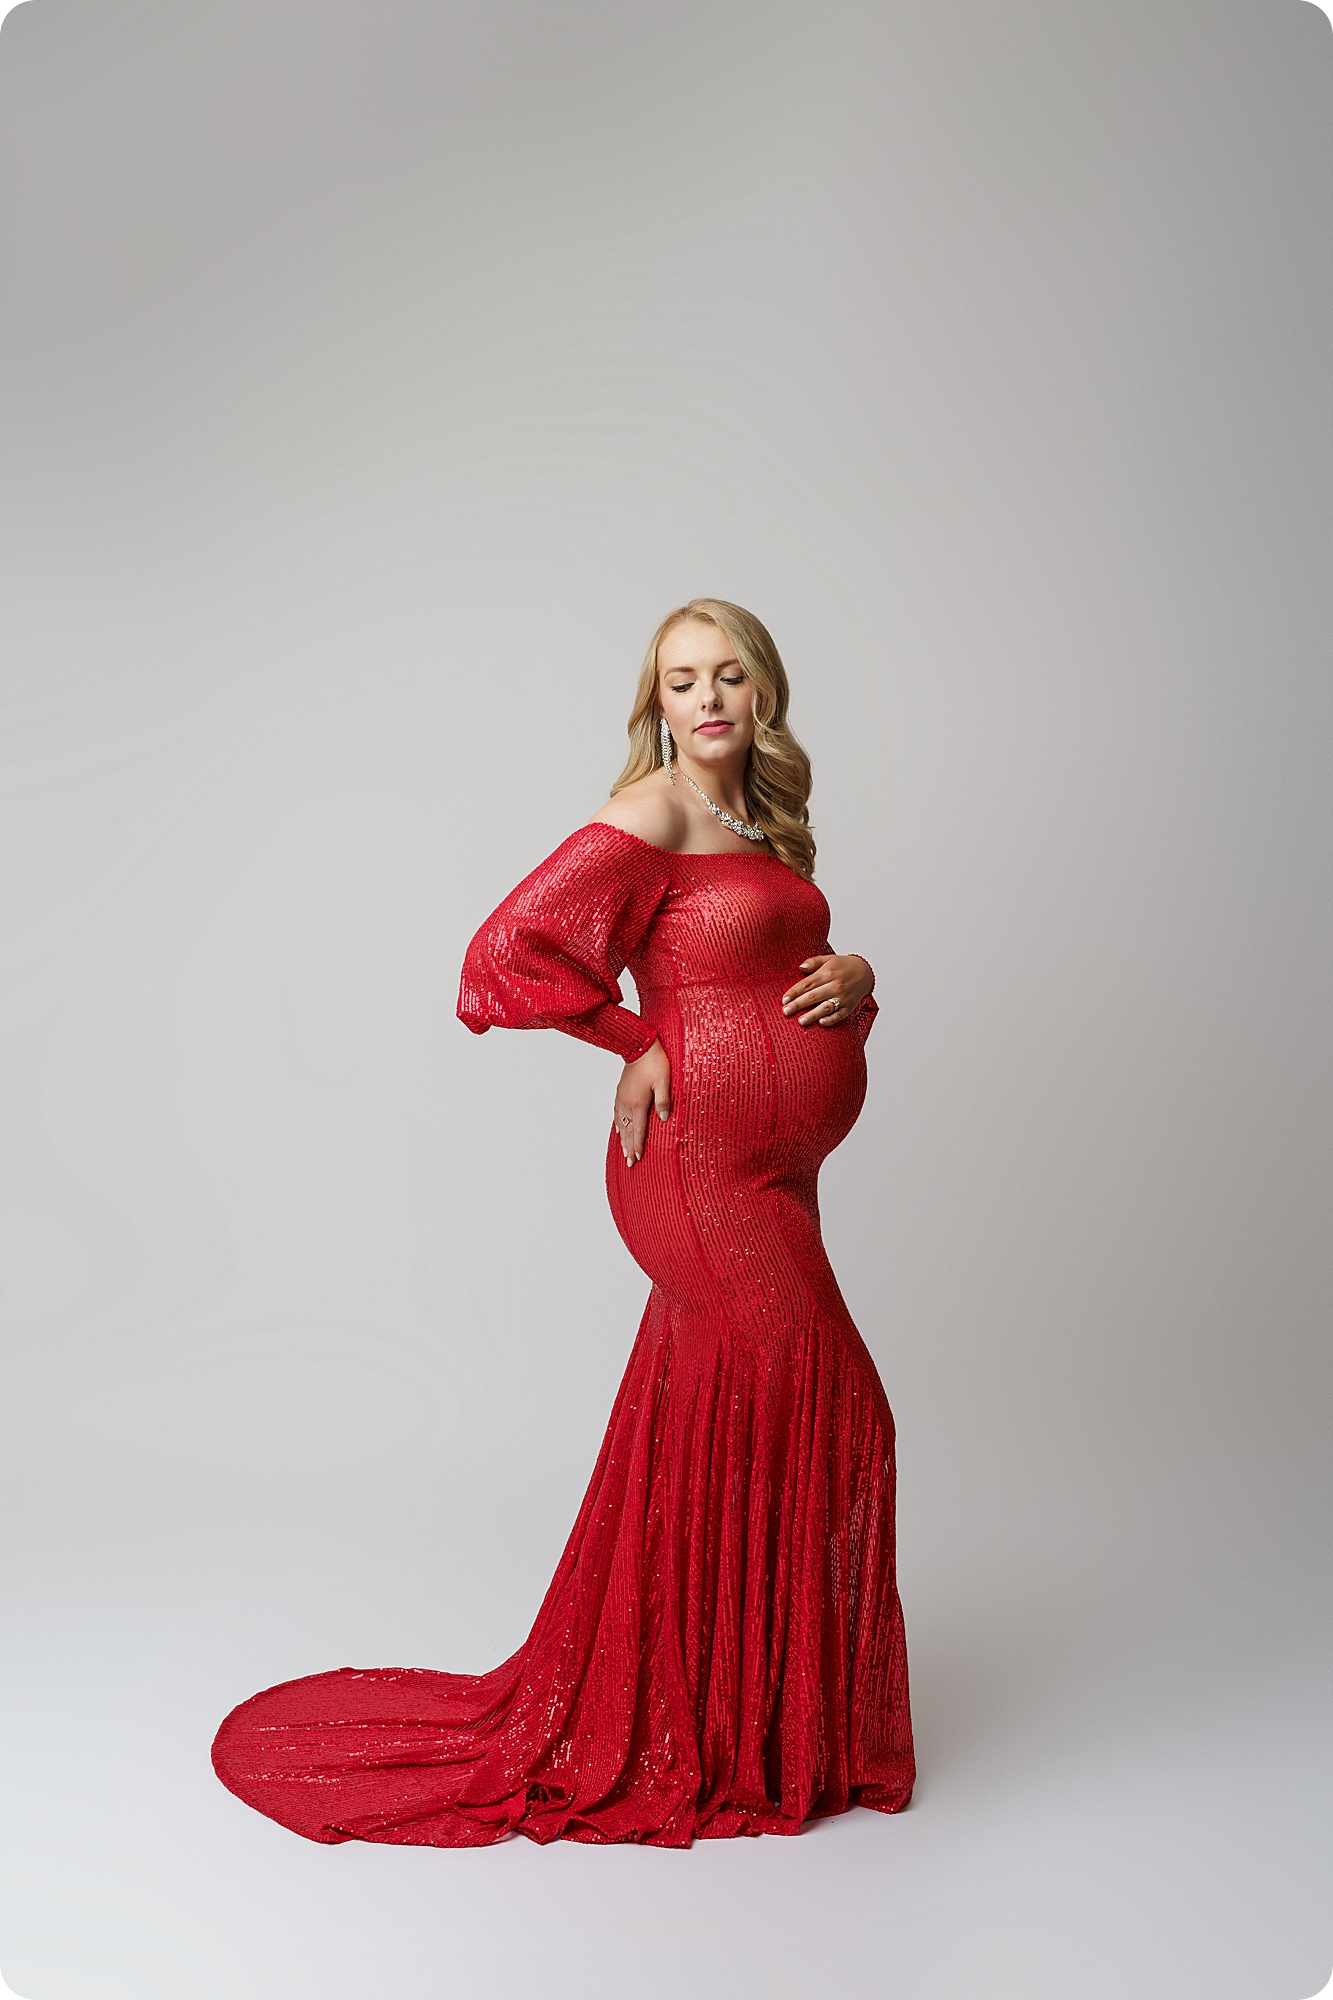 woman in red dress holds stomach during dramatic studio maternity portraits